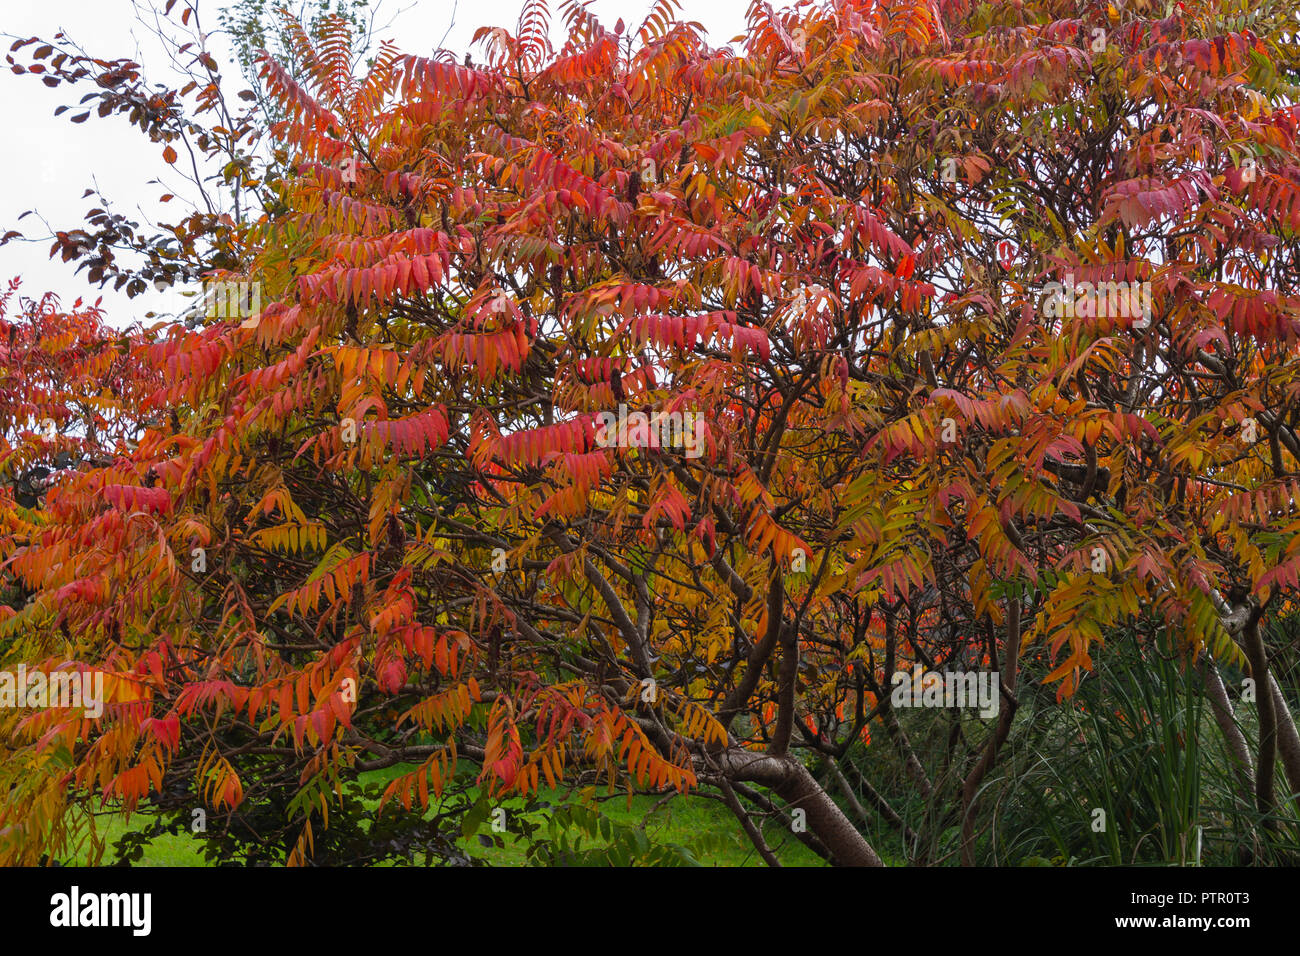 Rhus typhina  staghorn sumac with autumn leaves or foliage turning red. Stock Photo